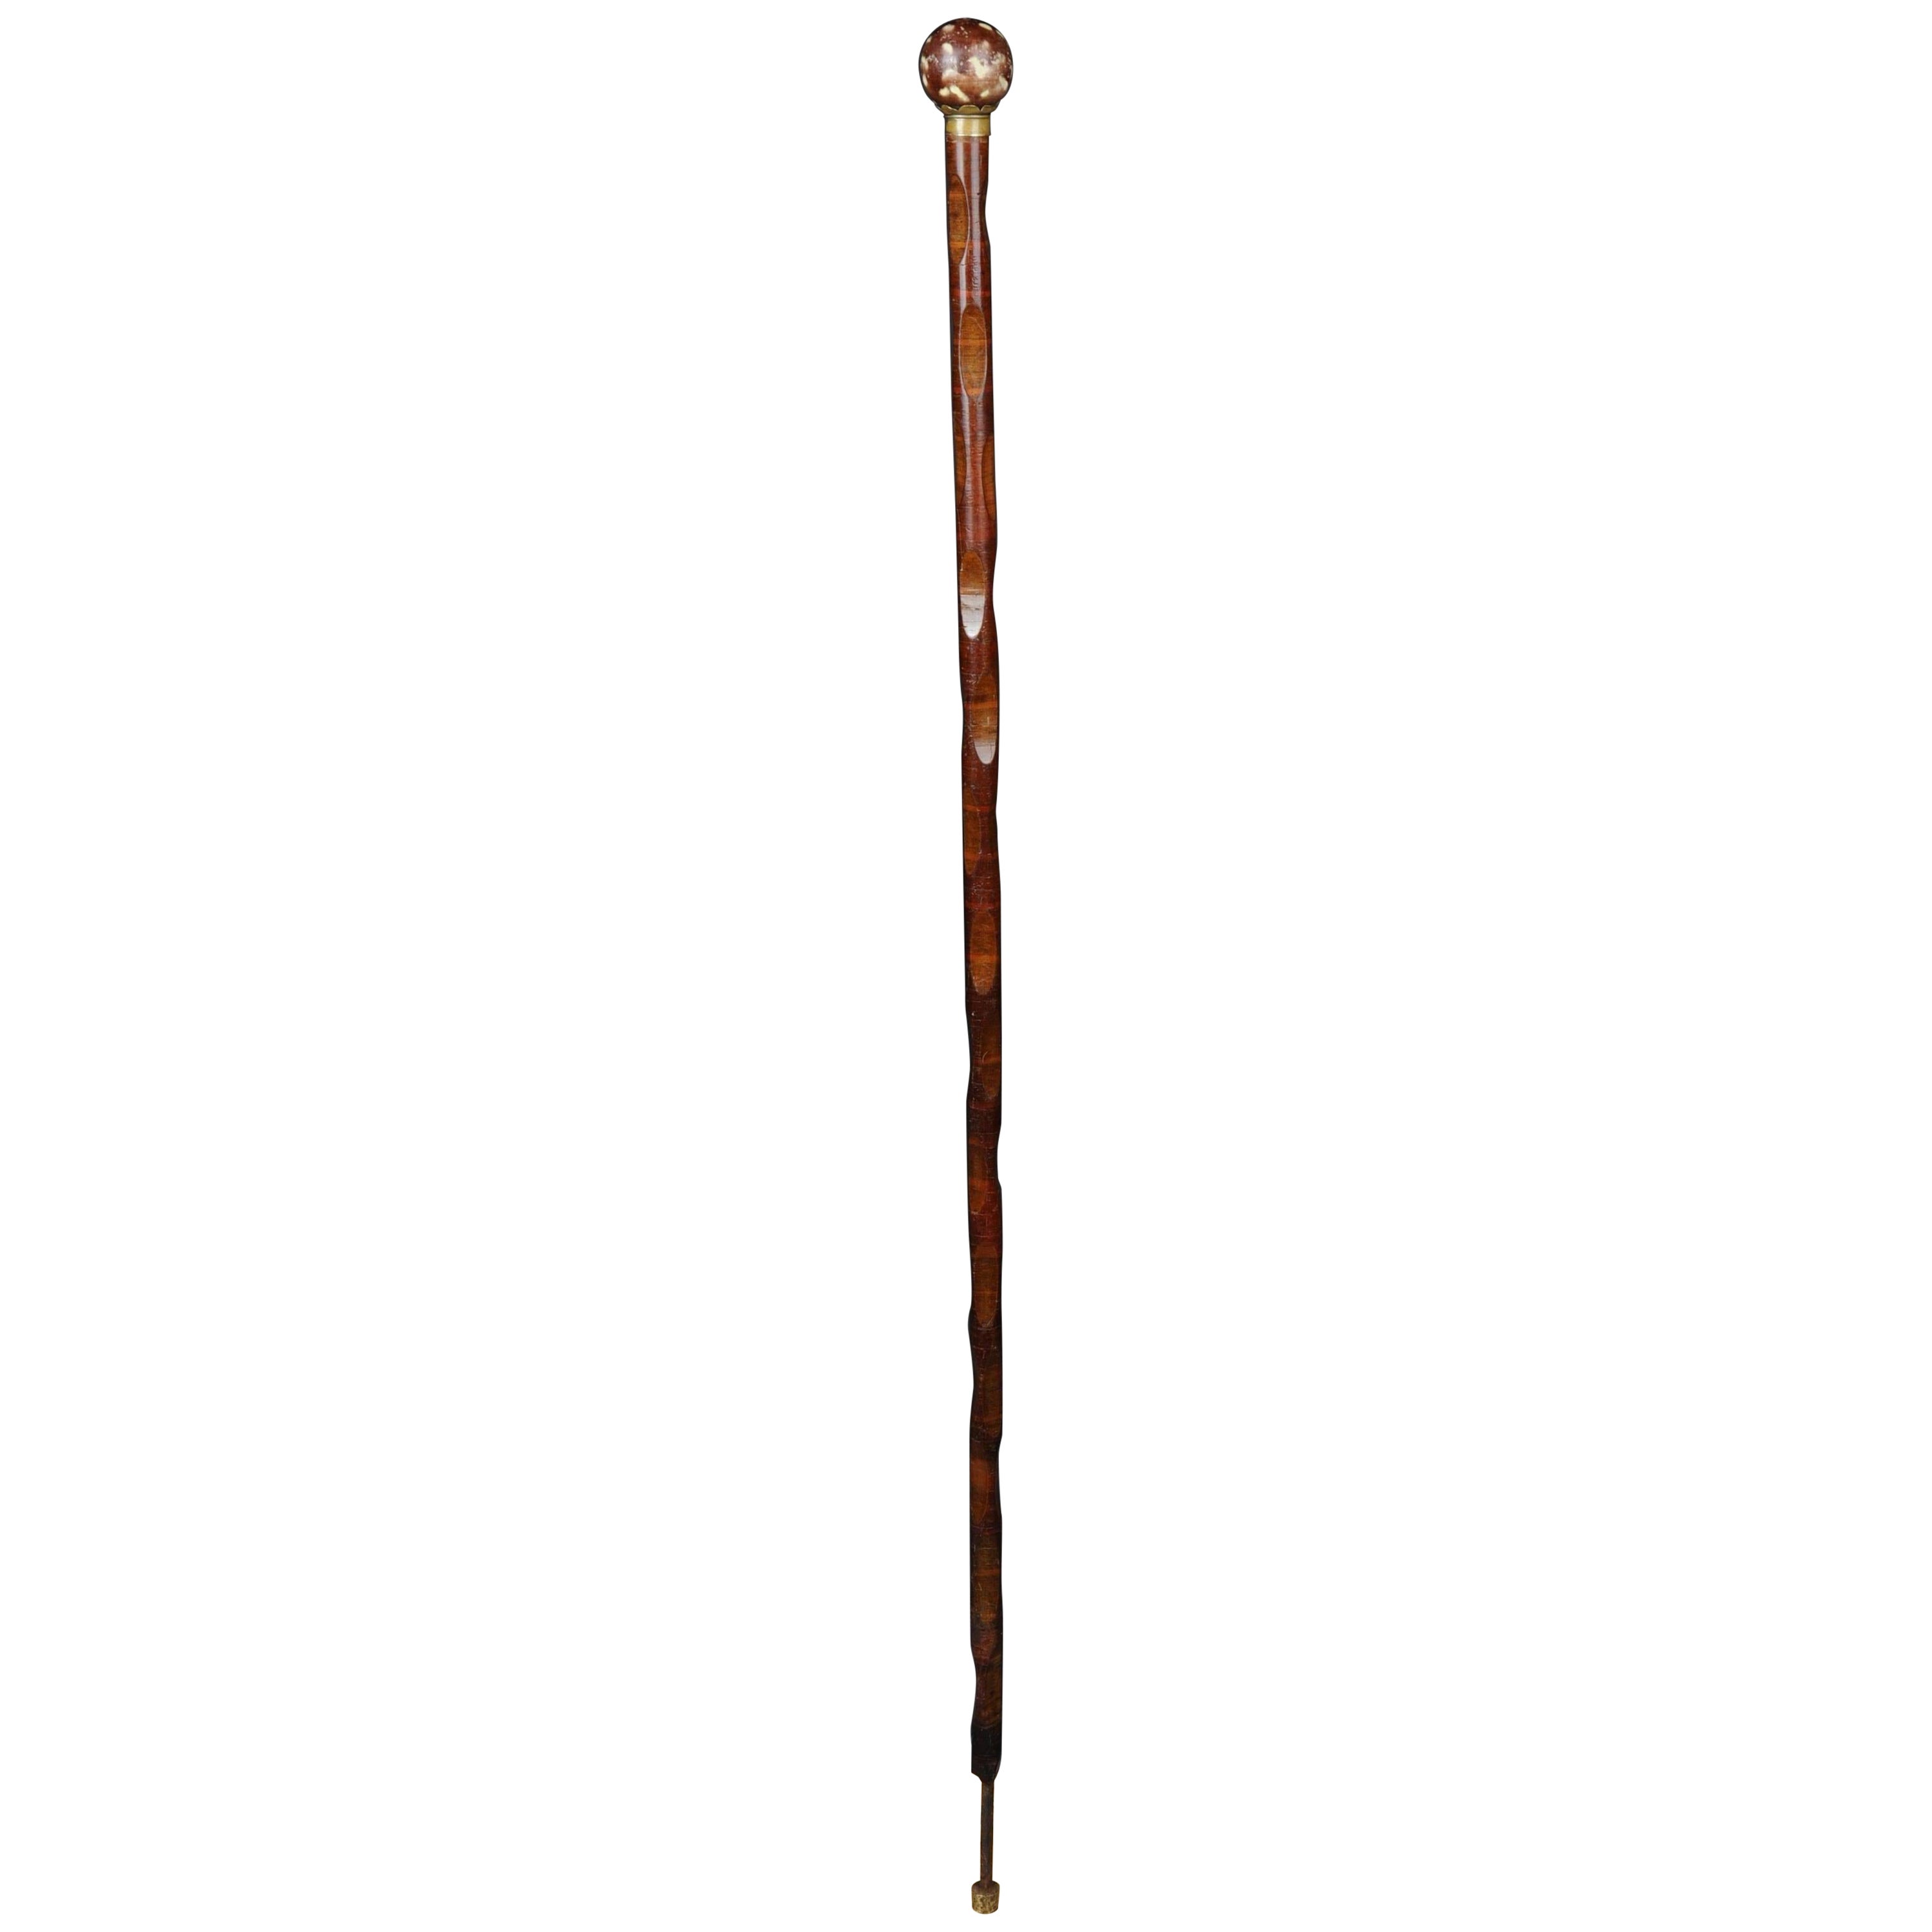 Walking Stick / Cane, Germany with Around 1910 For Sale